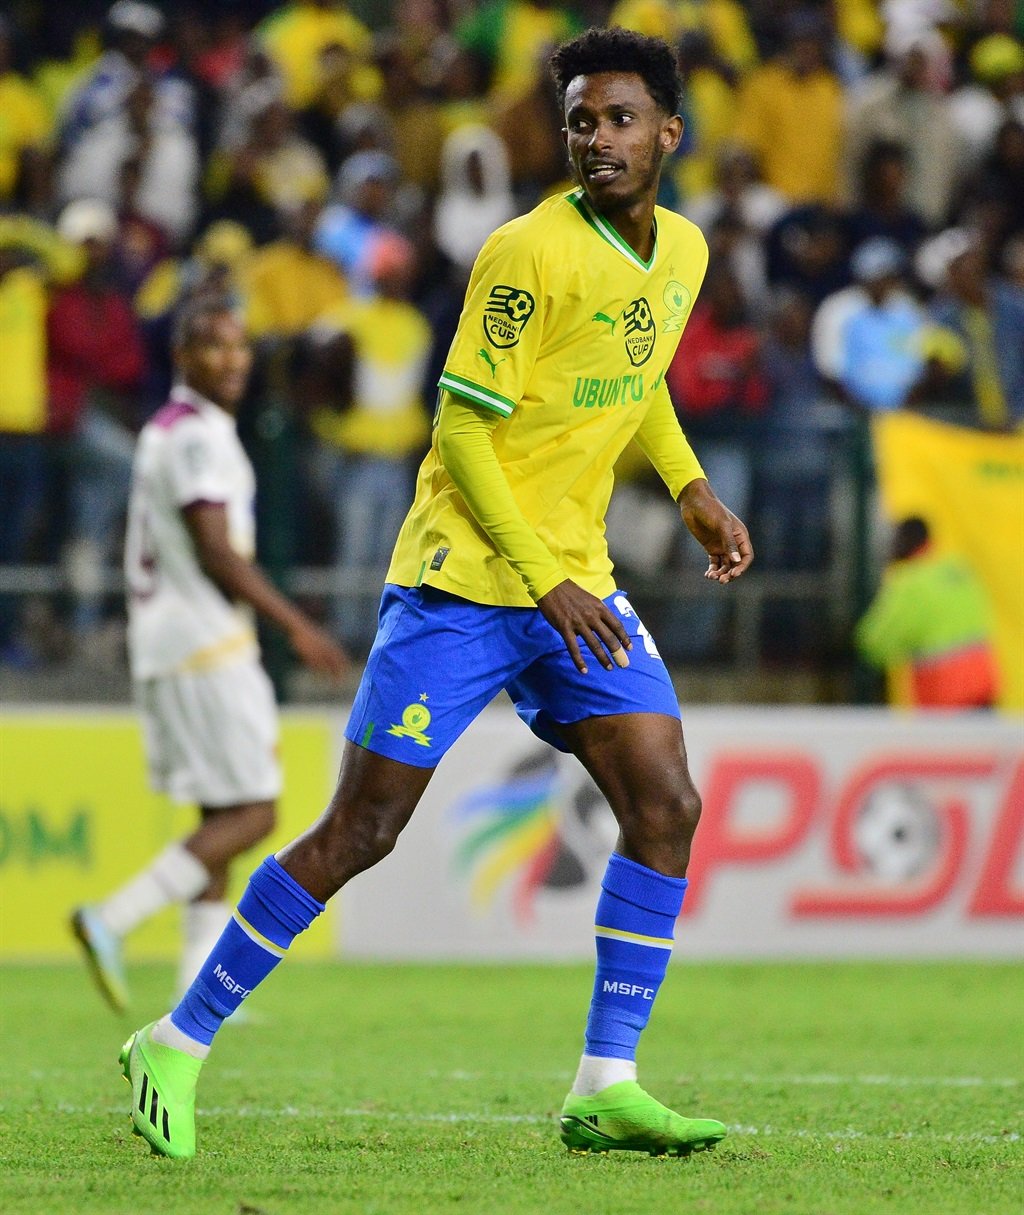 CAPE TOWN, SOUTH AFRICA - APRIL 15: Abubeker Nasir Ahmed of Mamelodi Sundowns during the Nedbank Cup quarter final match between Stellenbosch FC and Mamelodi Sundowns at Athlone Stadium on April 15, 2023 in Cape Town, South Africa. (Photo by Grant Pitcher/Gallo Images)